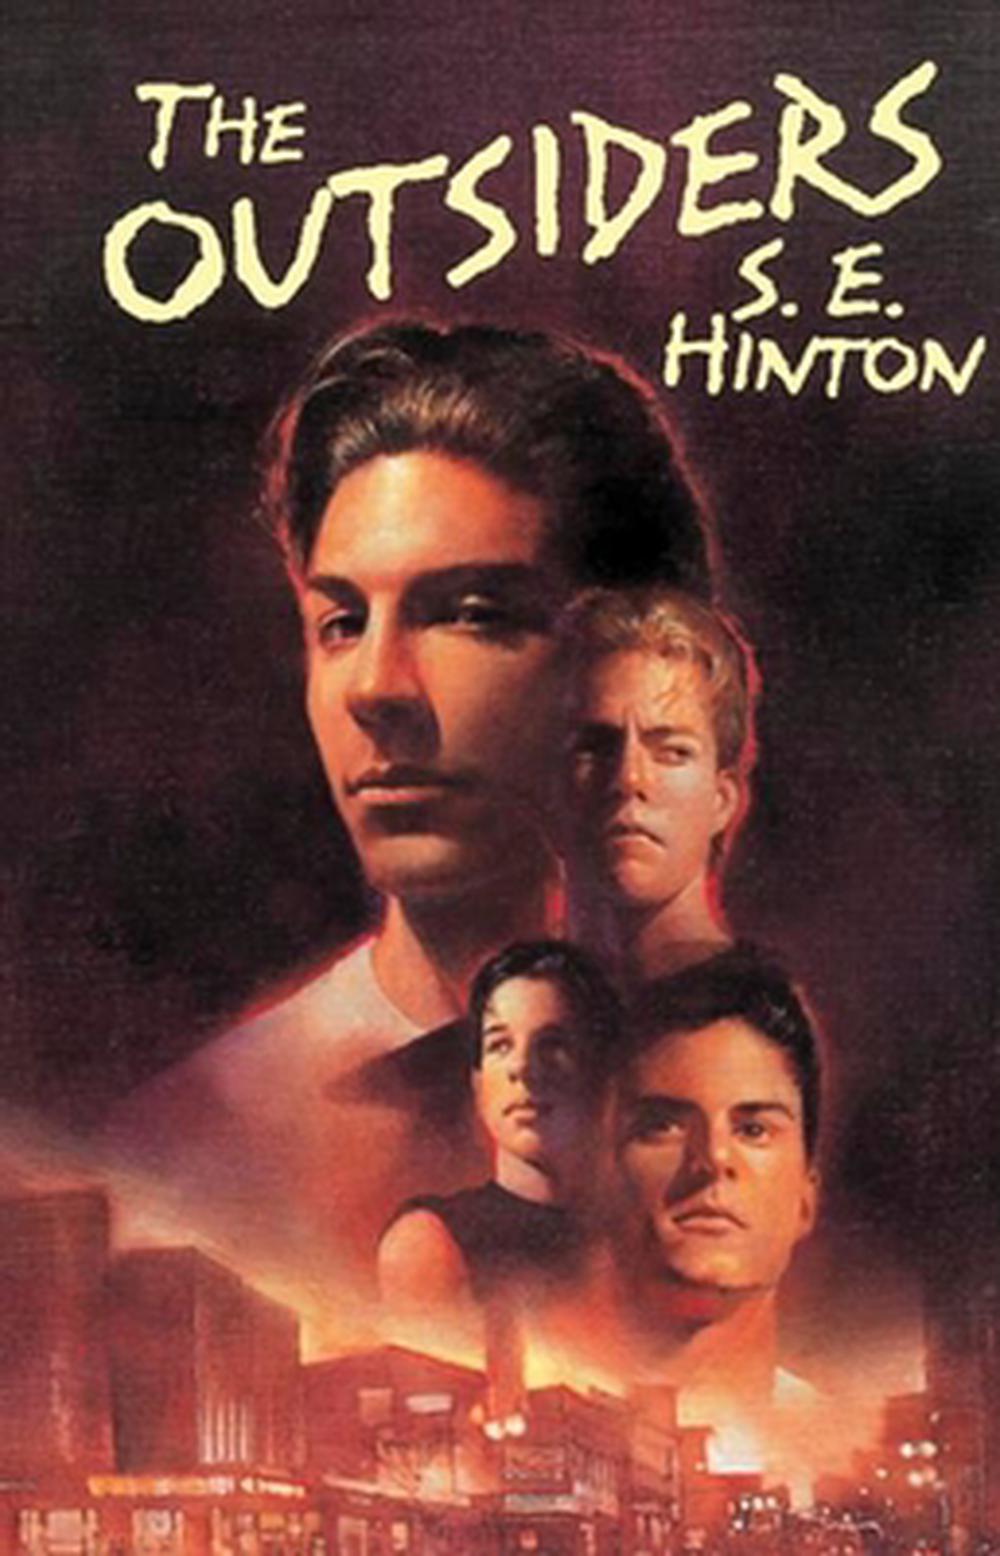 the-outsiders-by-s-e-hinton-english-hardcover-book-free-shipping-9780670532575-ebay